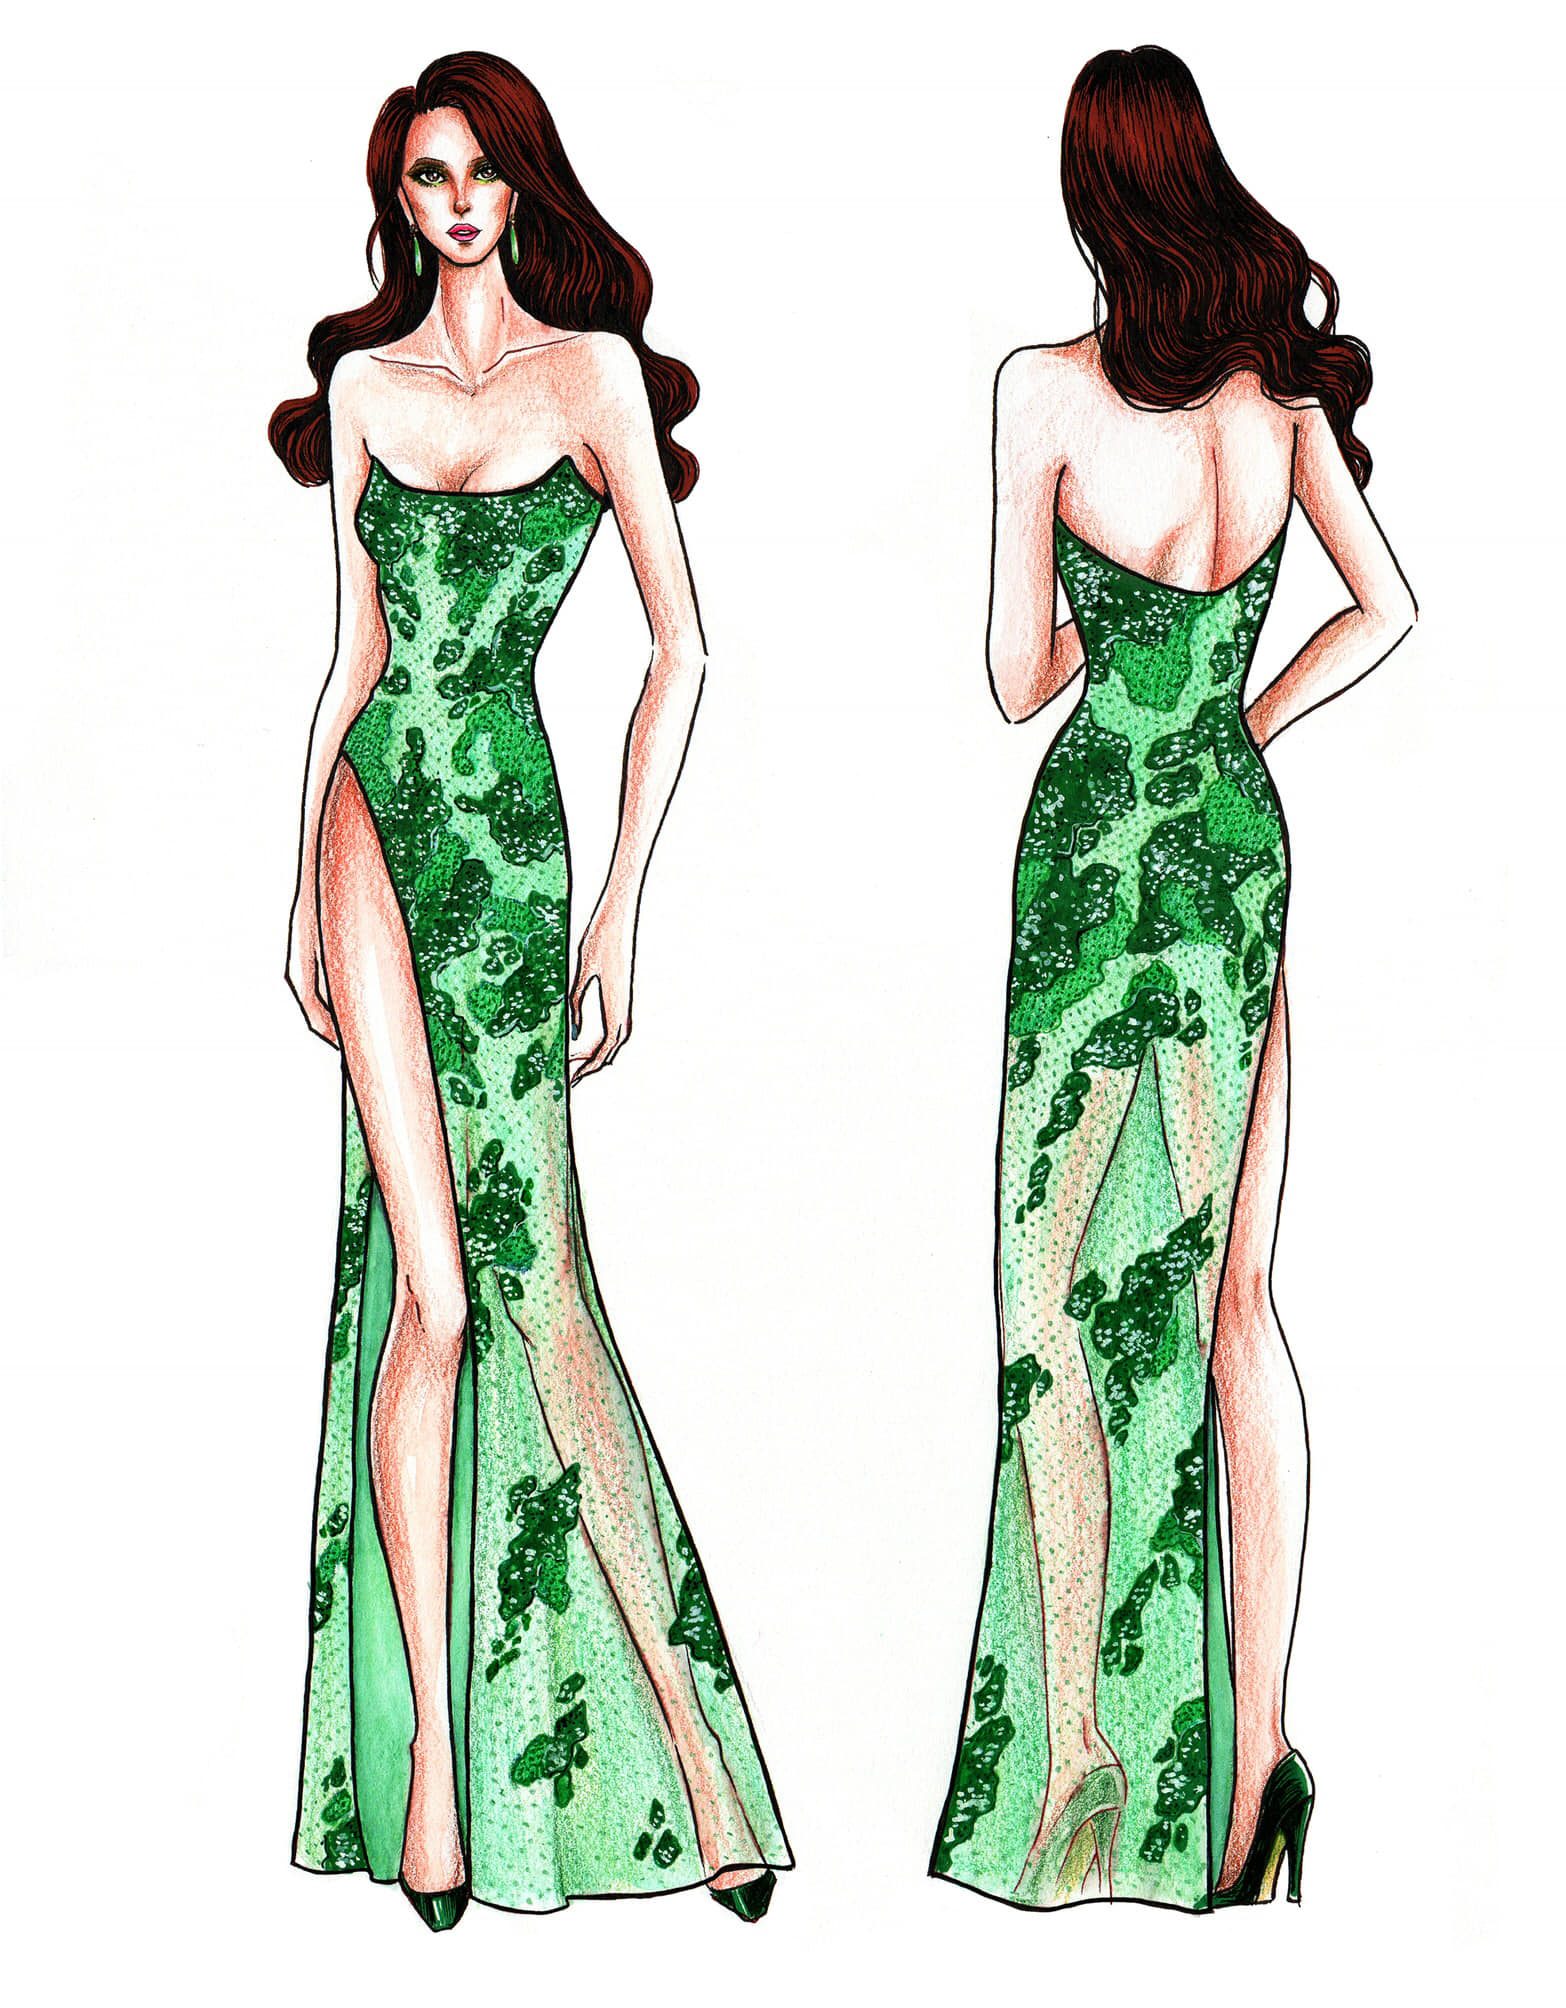 THE ISLANDS. A green gown that has the pattern of the country's islands. Photo from Facebook/Mak Tumang 